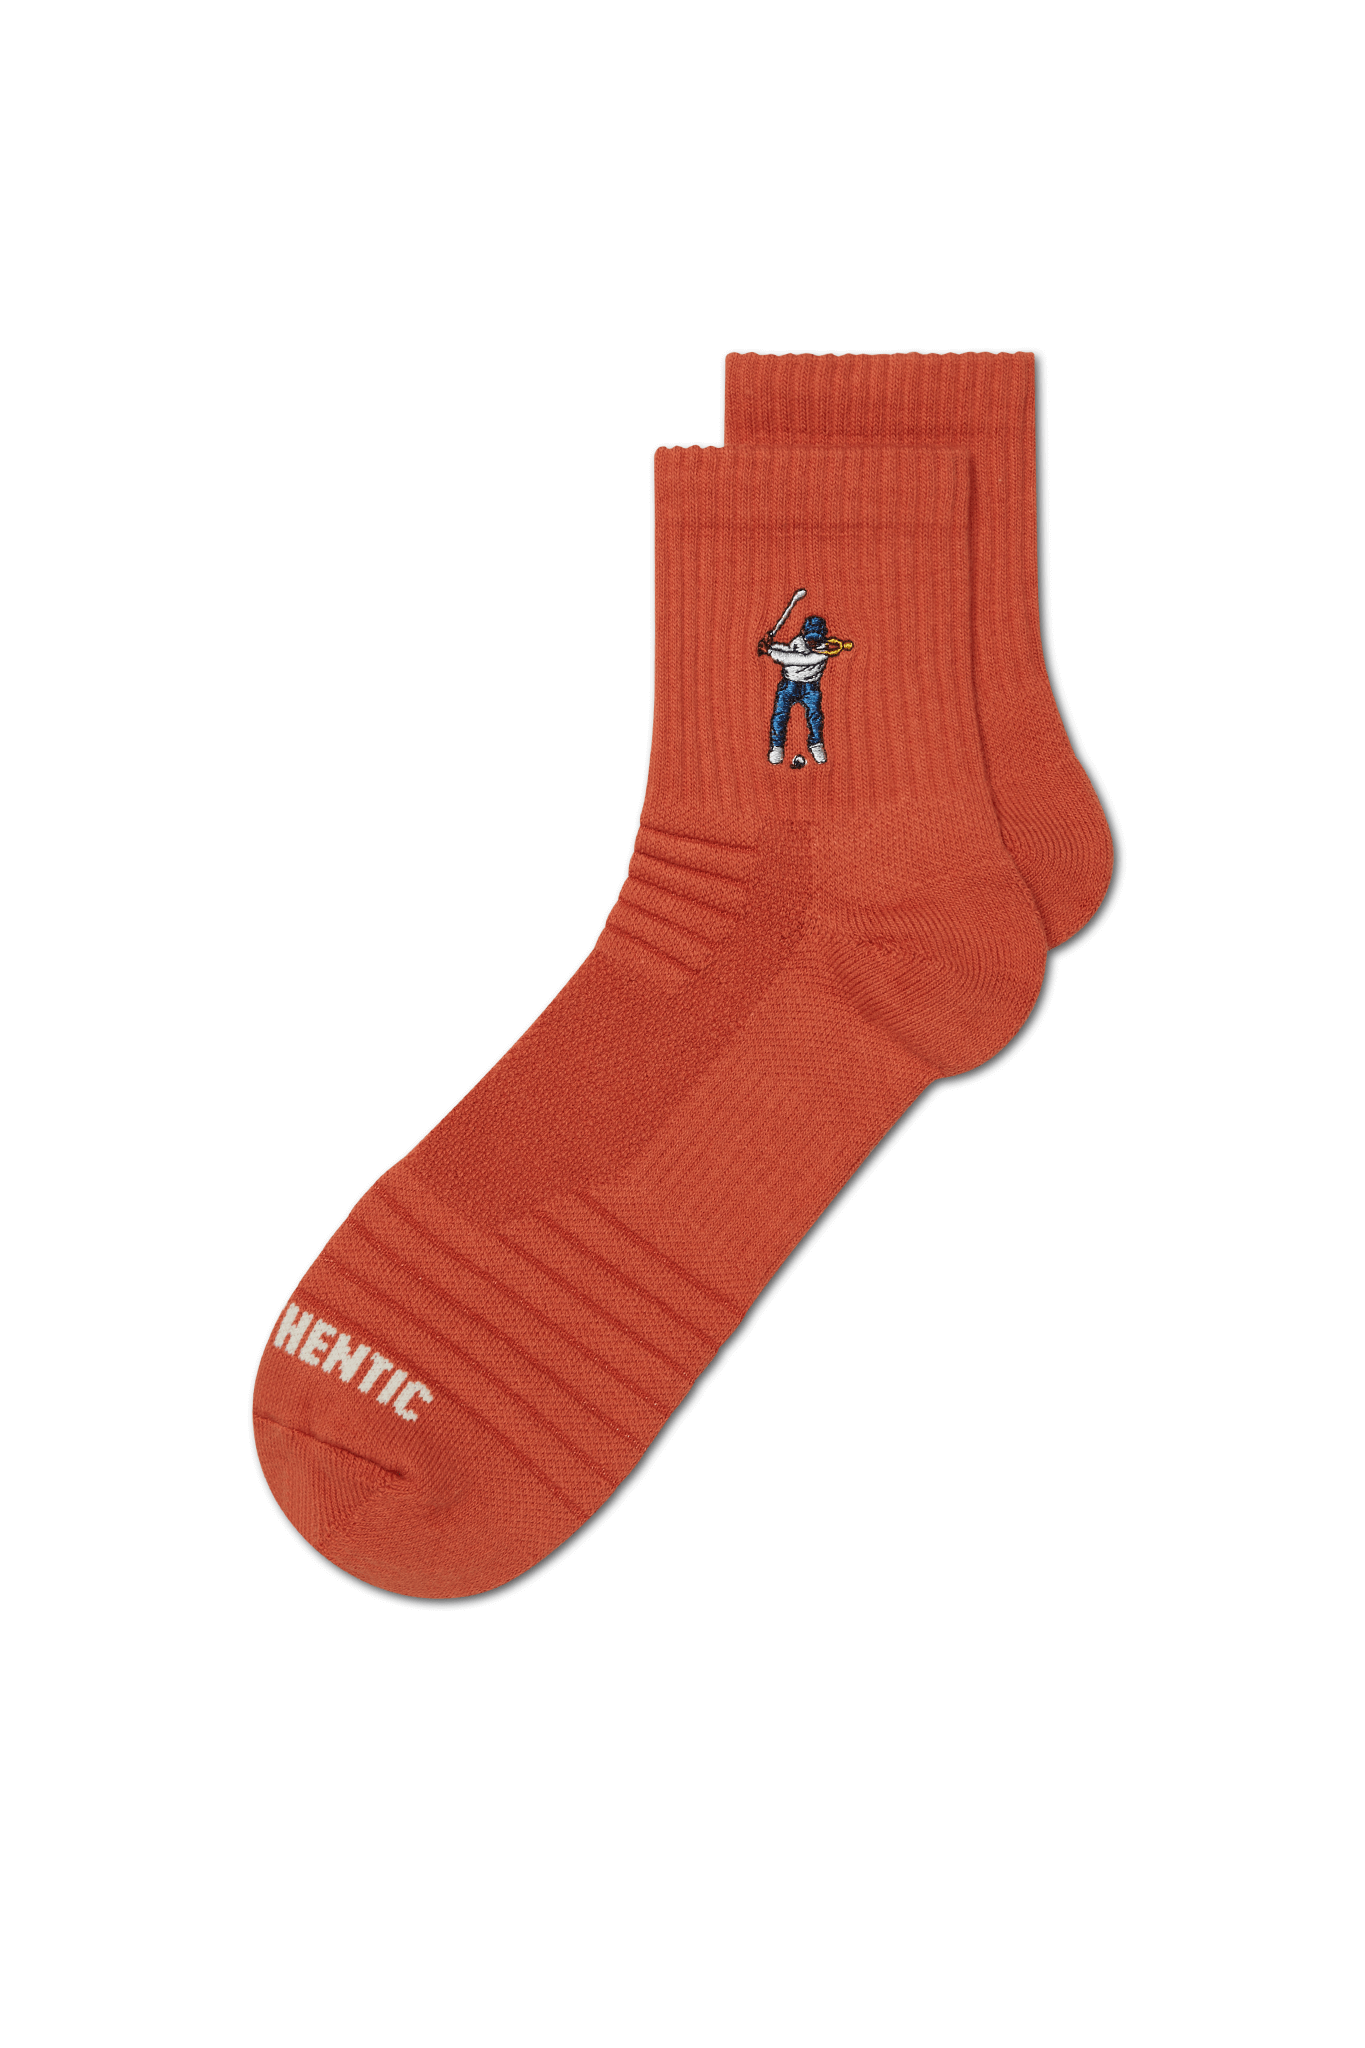 Eastside Golf Player Logo Ankle Height Socks Red Clay